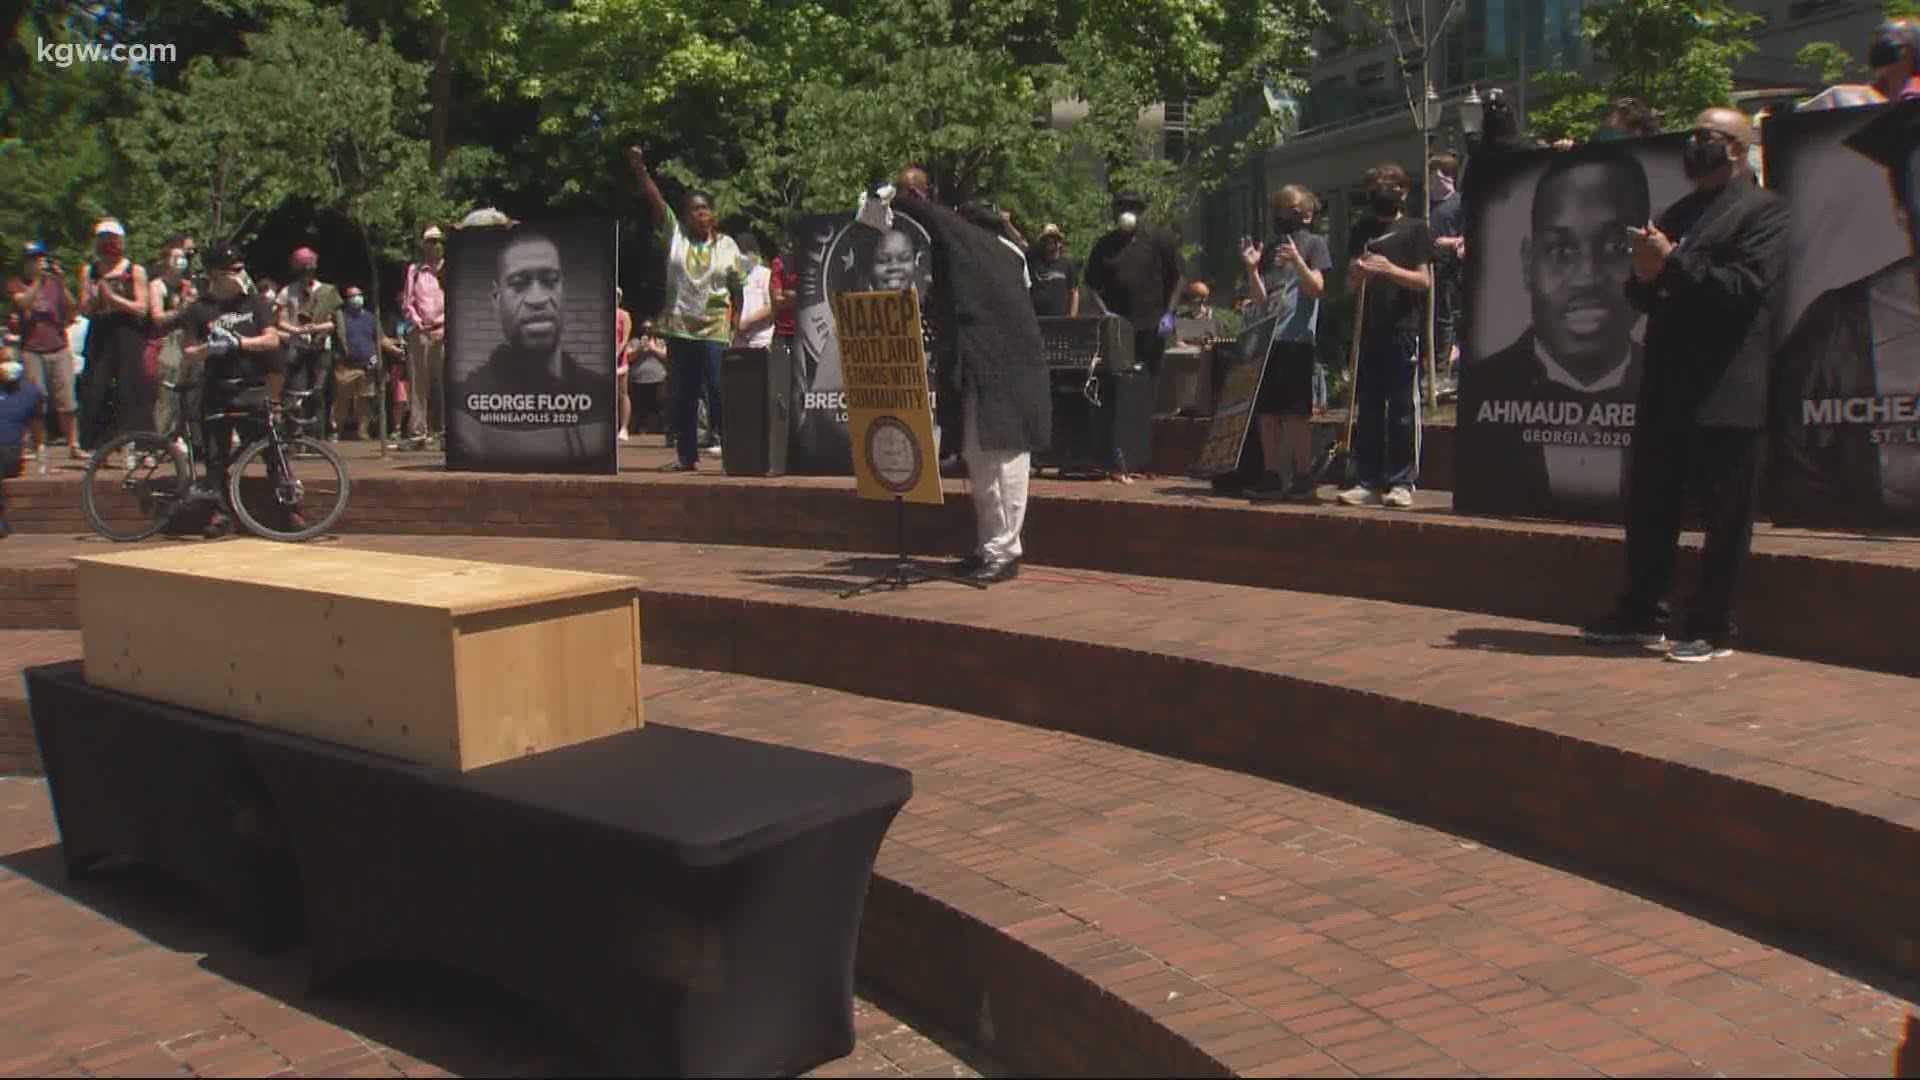 A peaceful demonstration protesting the alleged murder of George Floyd was held Friday afternoon in Portland.